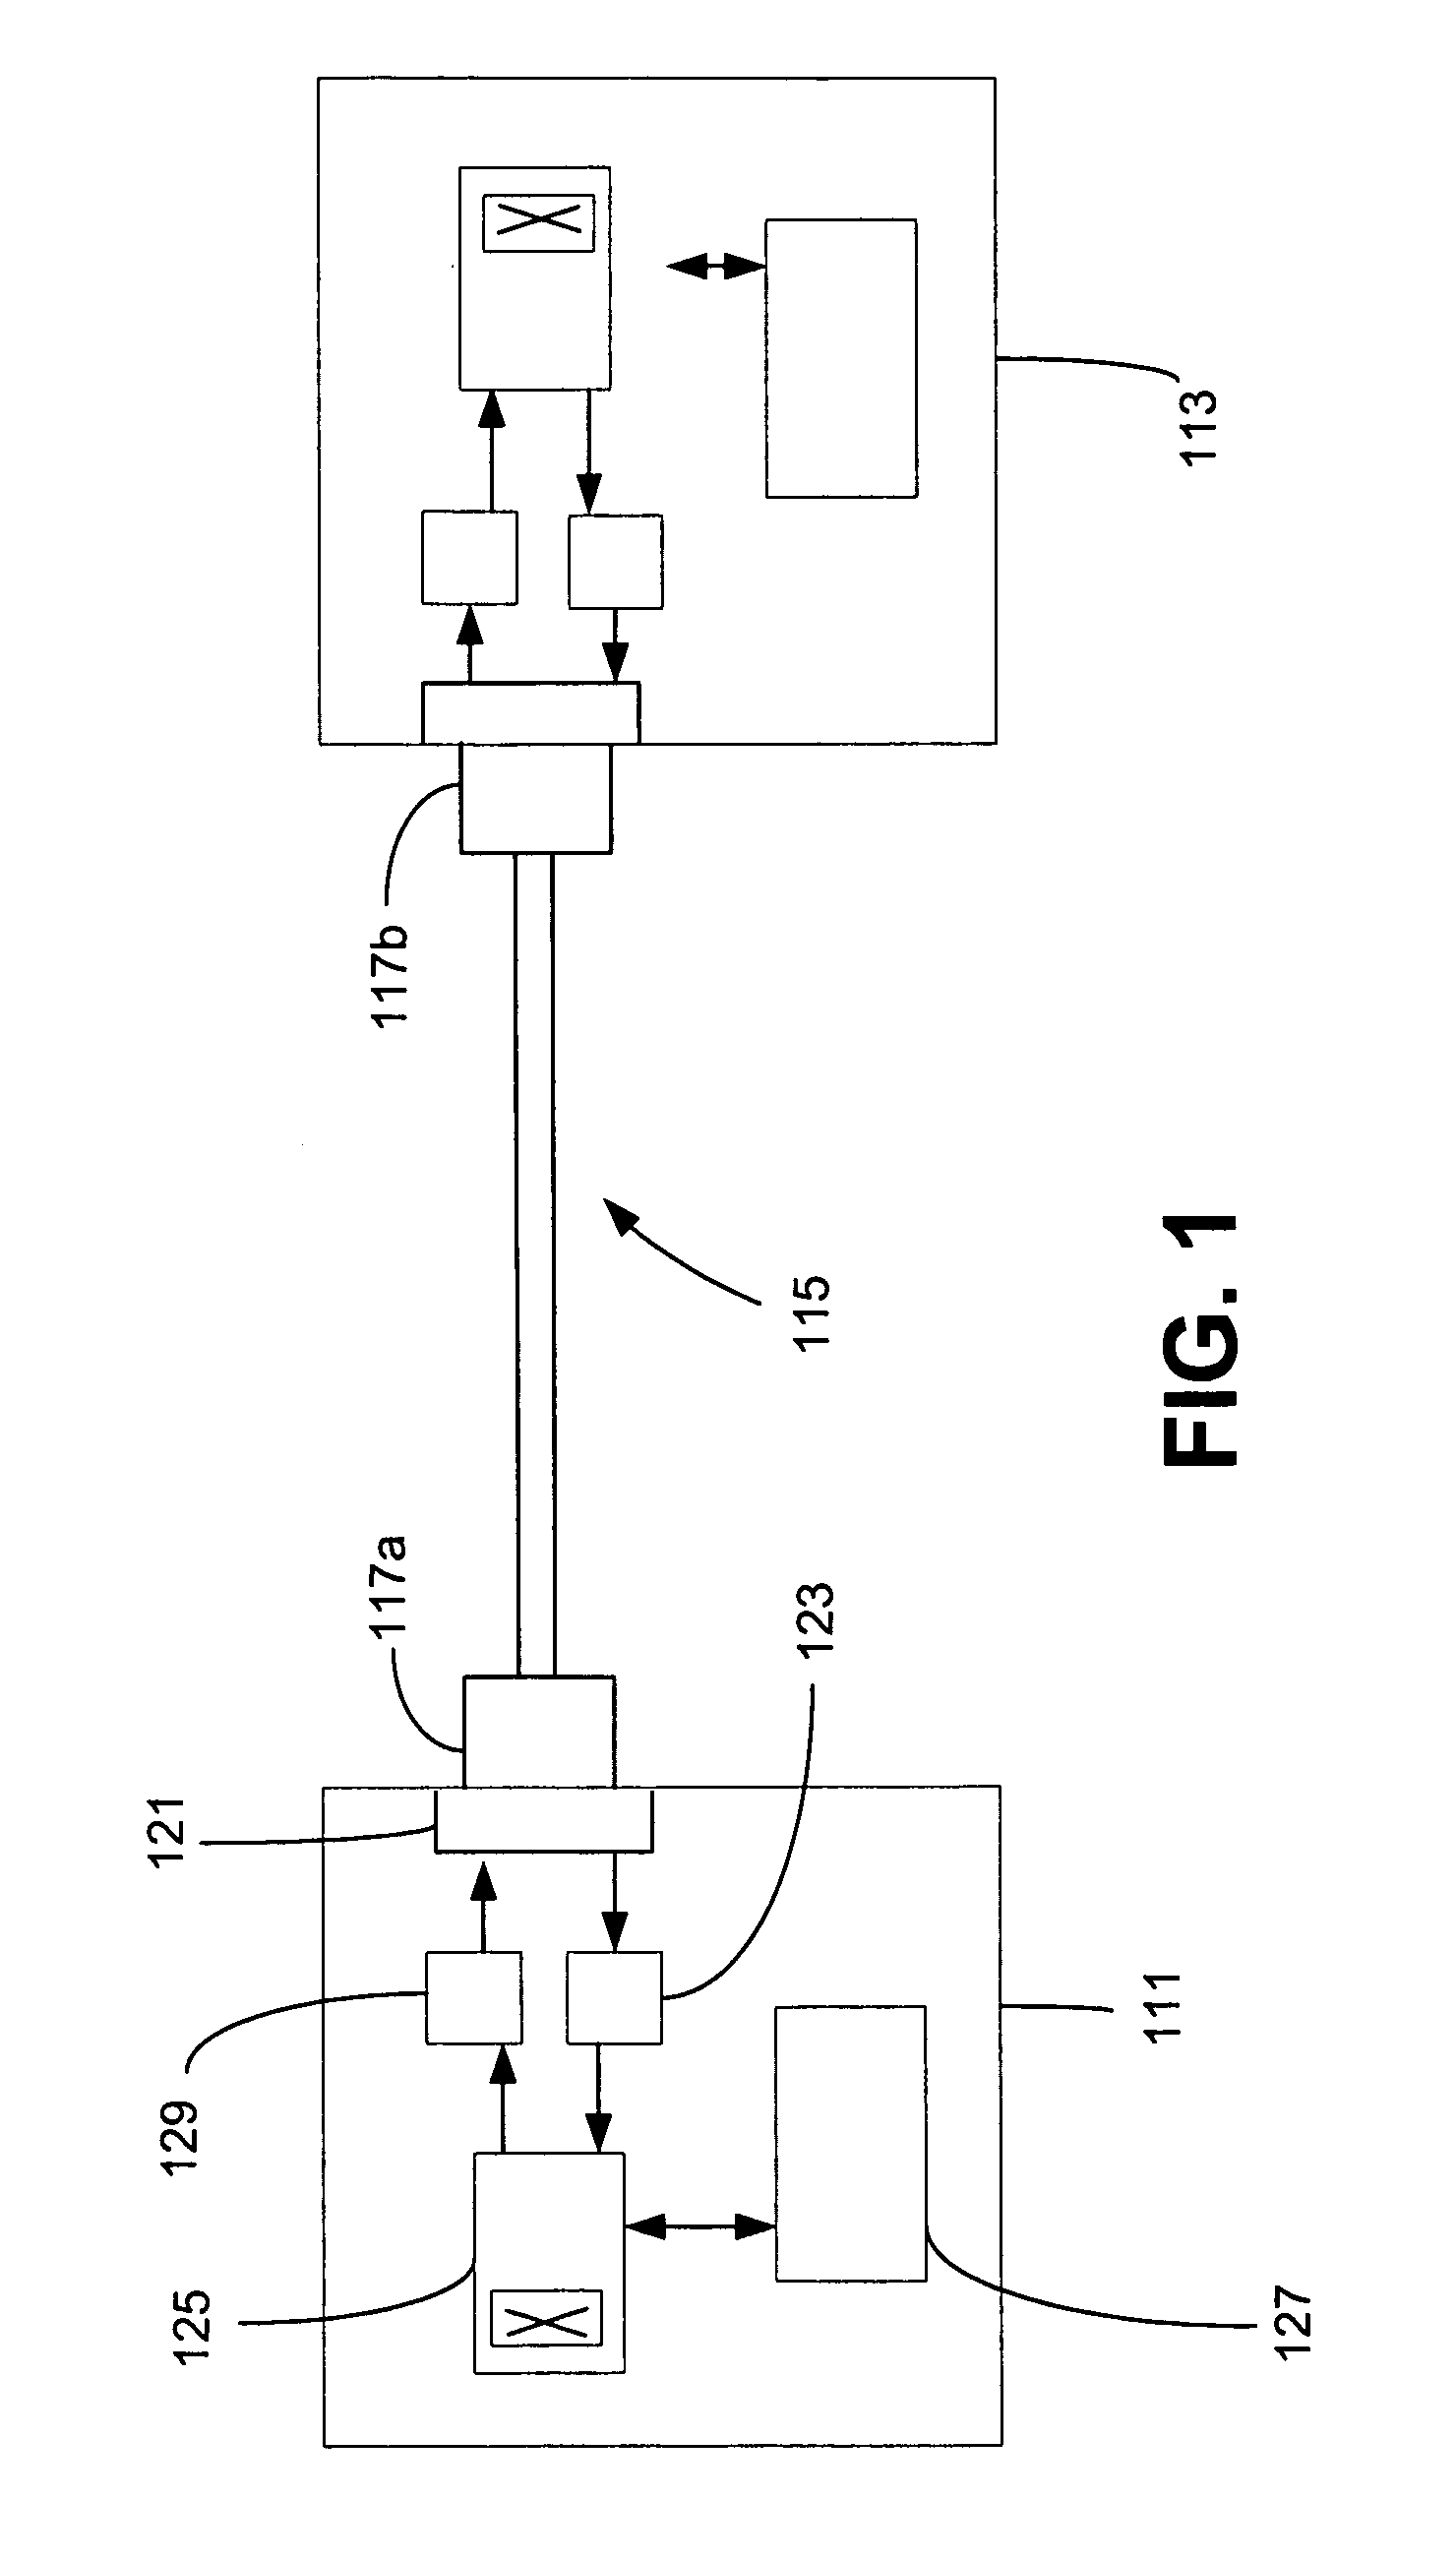 High-speed data interface for connecting network devices